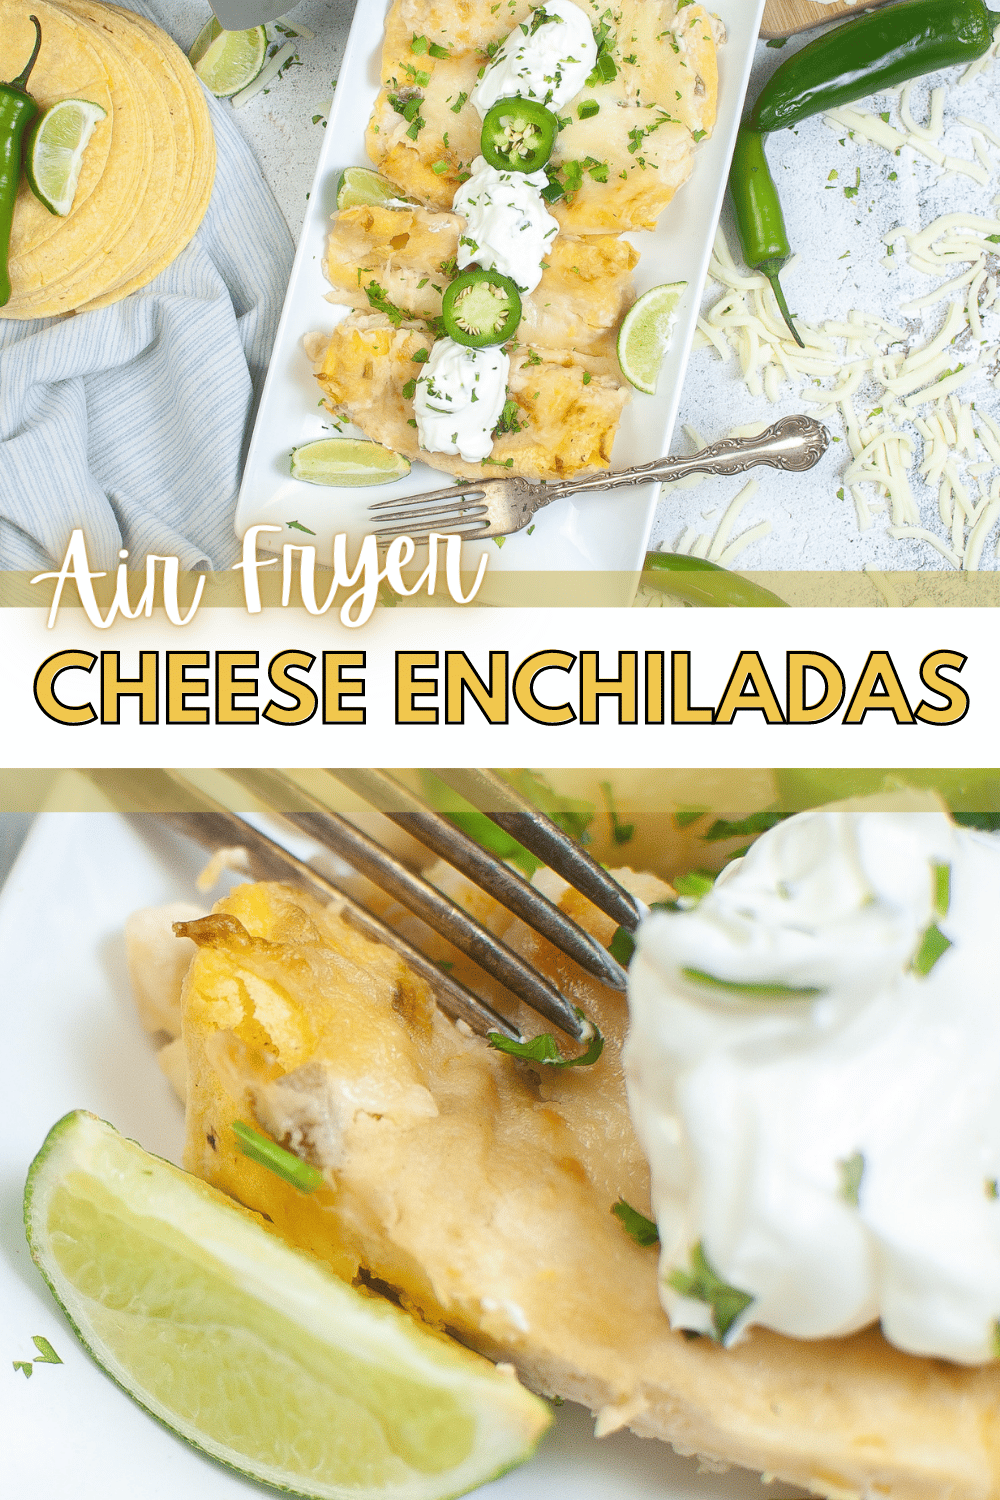 Air Fryer Cheese Enchiladas are a delicious and easy way to make a classic Mexican dish. Serve with your favorite toppings and enjoy! #airfryer #cheeseenchiladas #enchiladas #mexicanfood via @wondermomwannab